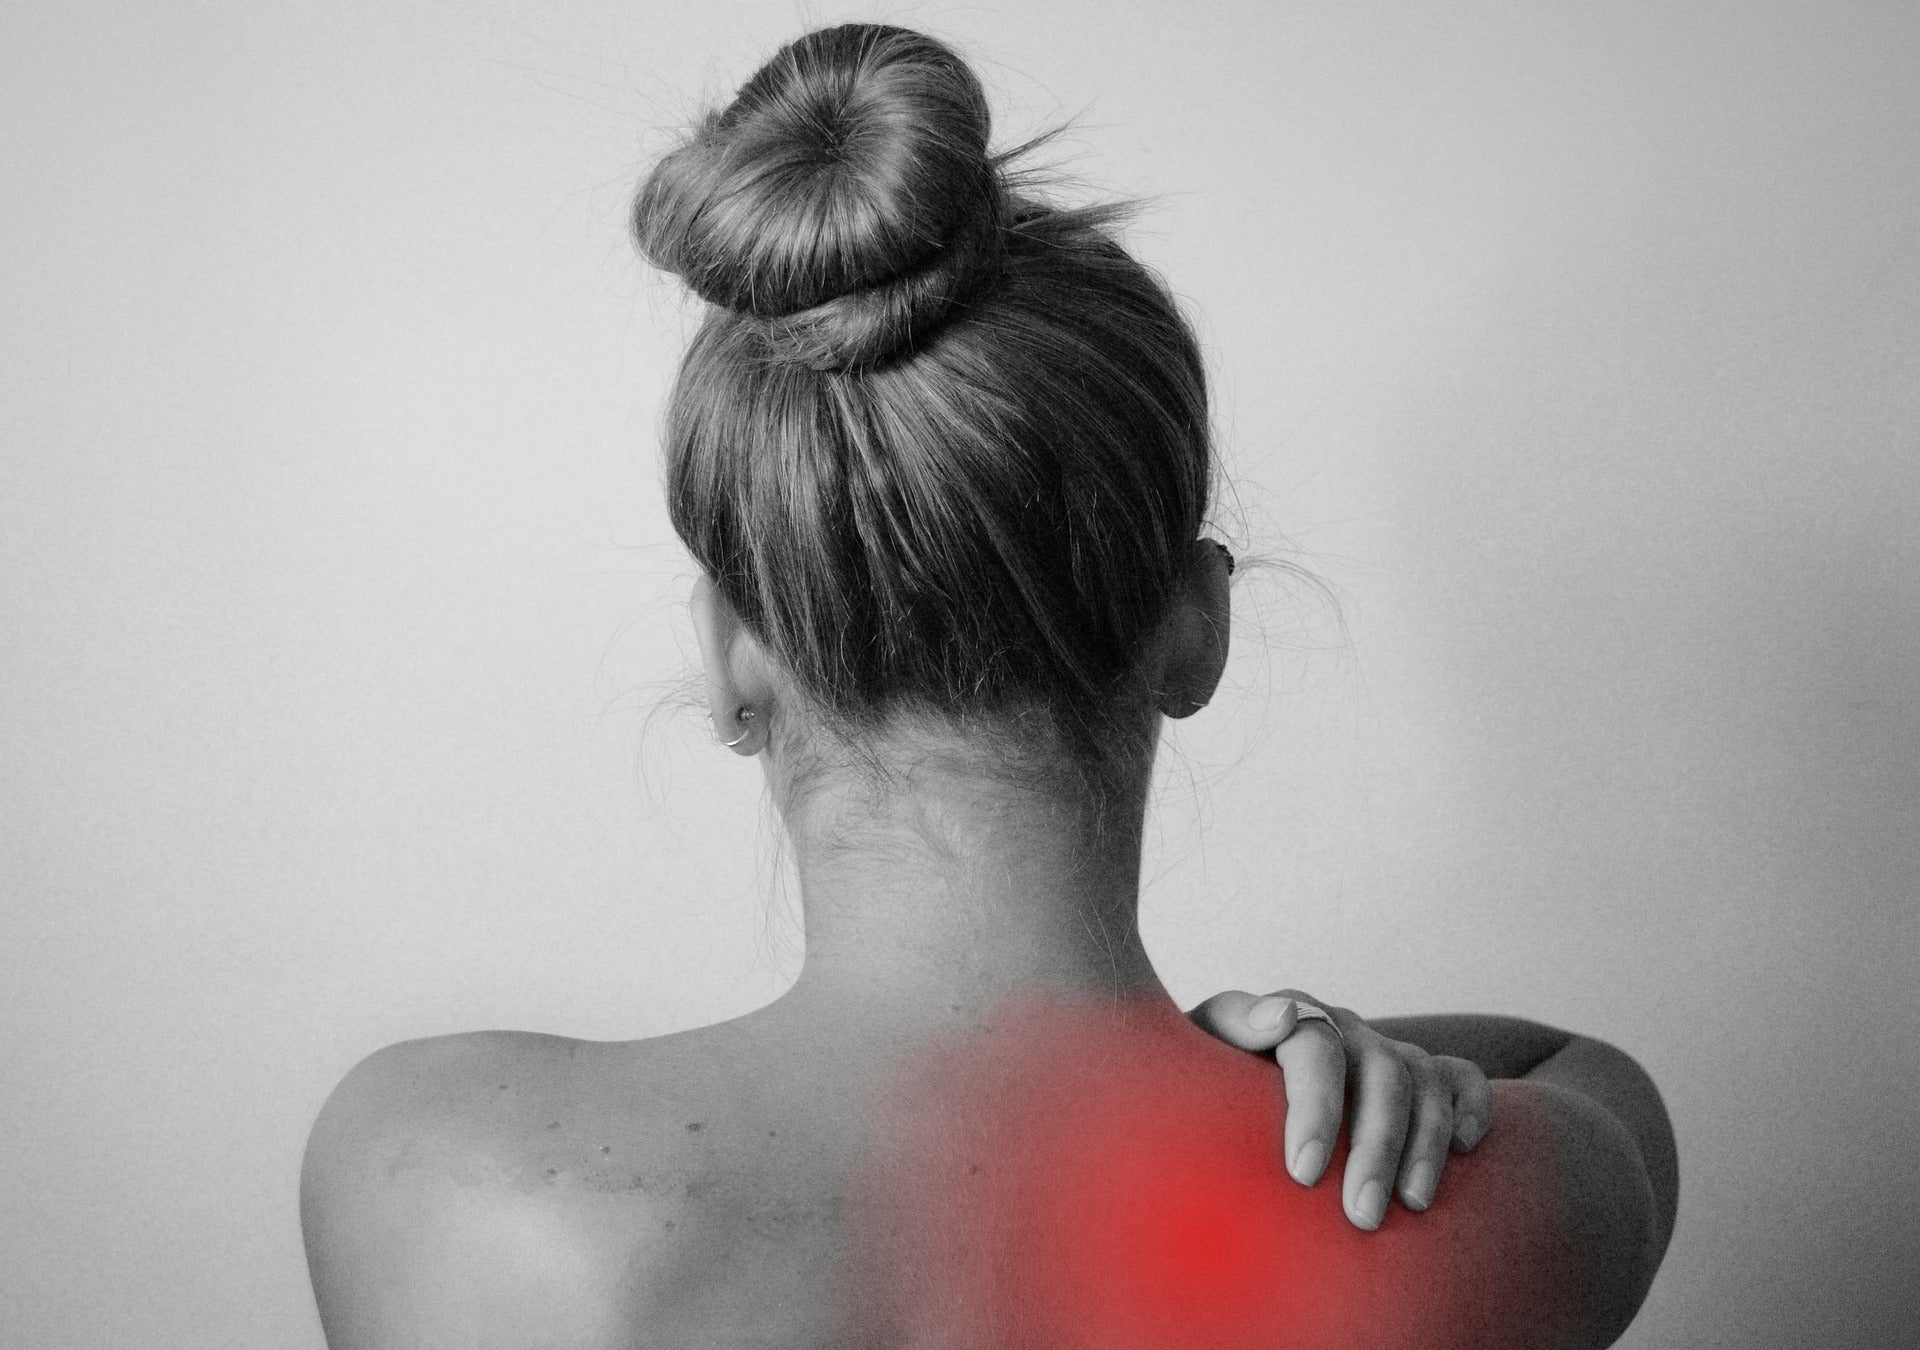 An image of a woman's shoulder with red mark, meaning shoulder pain.